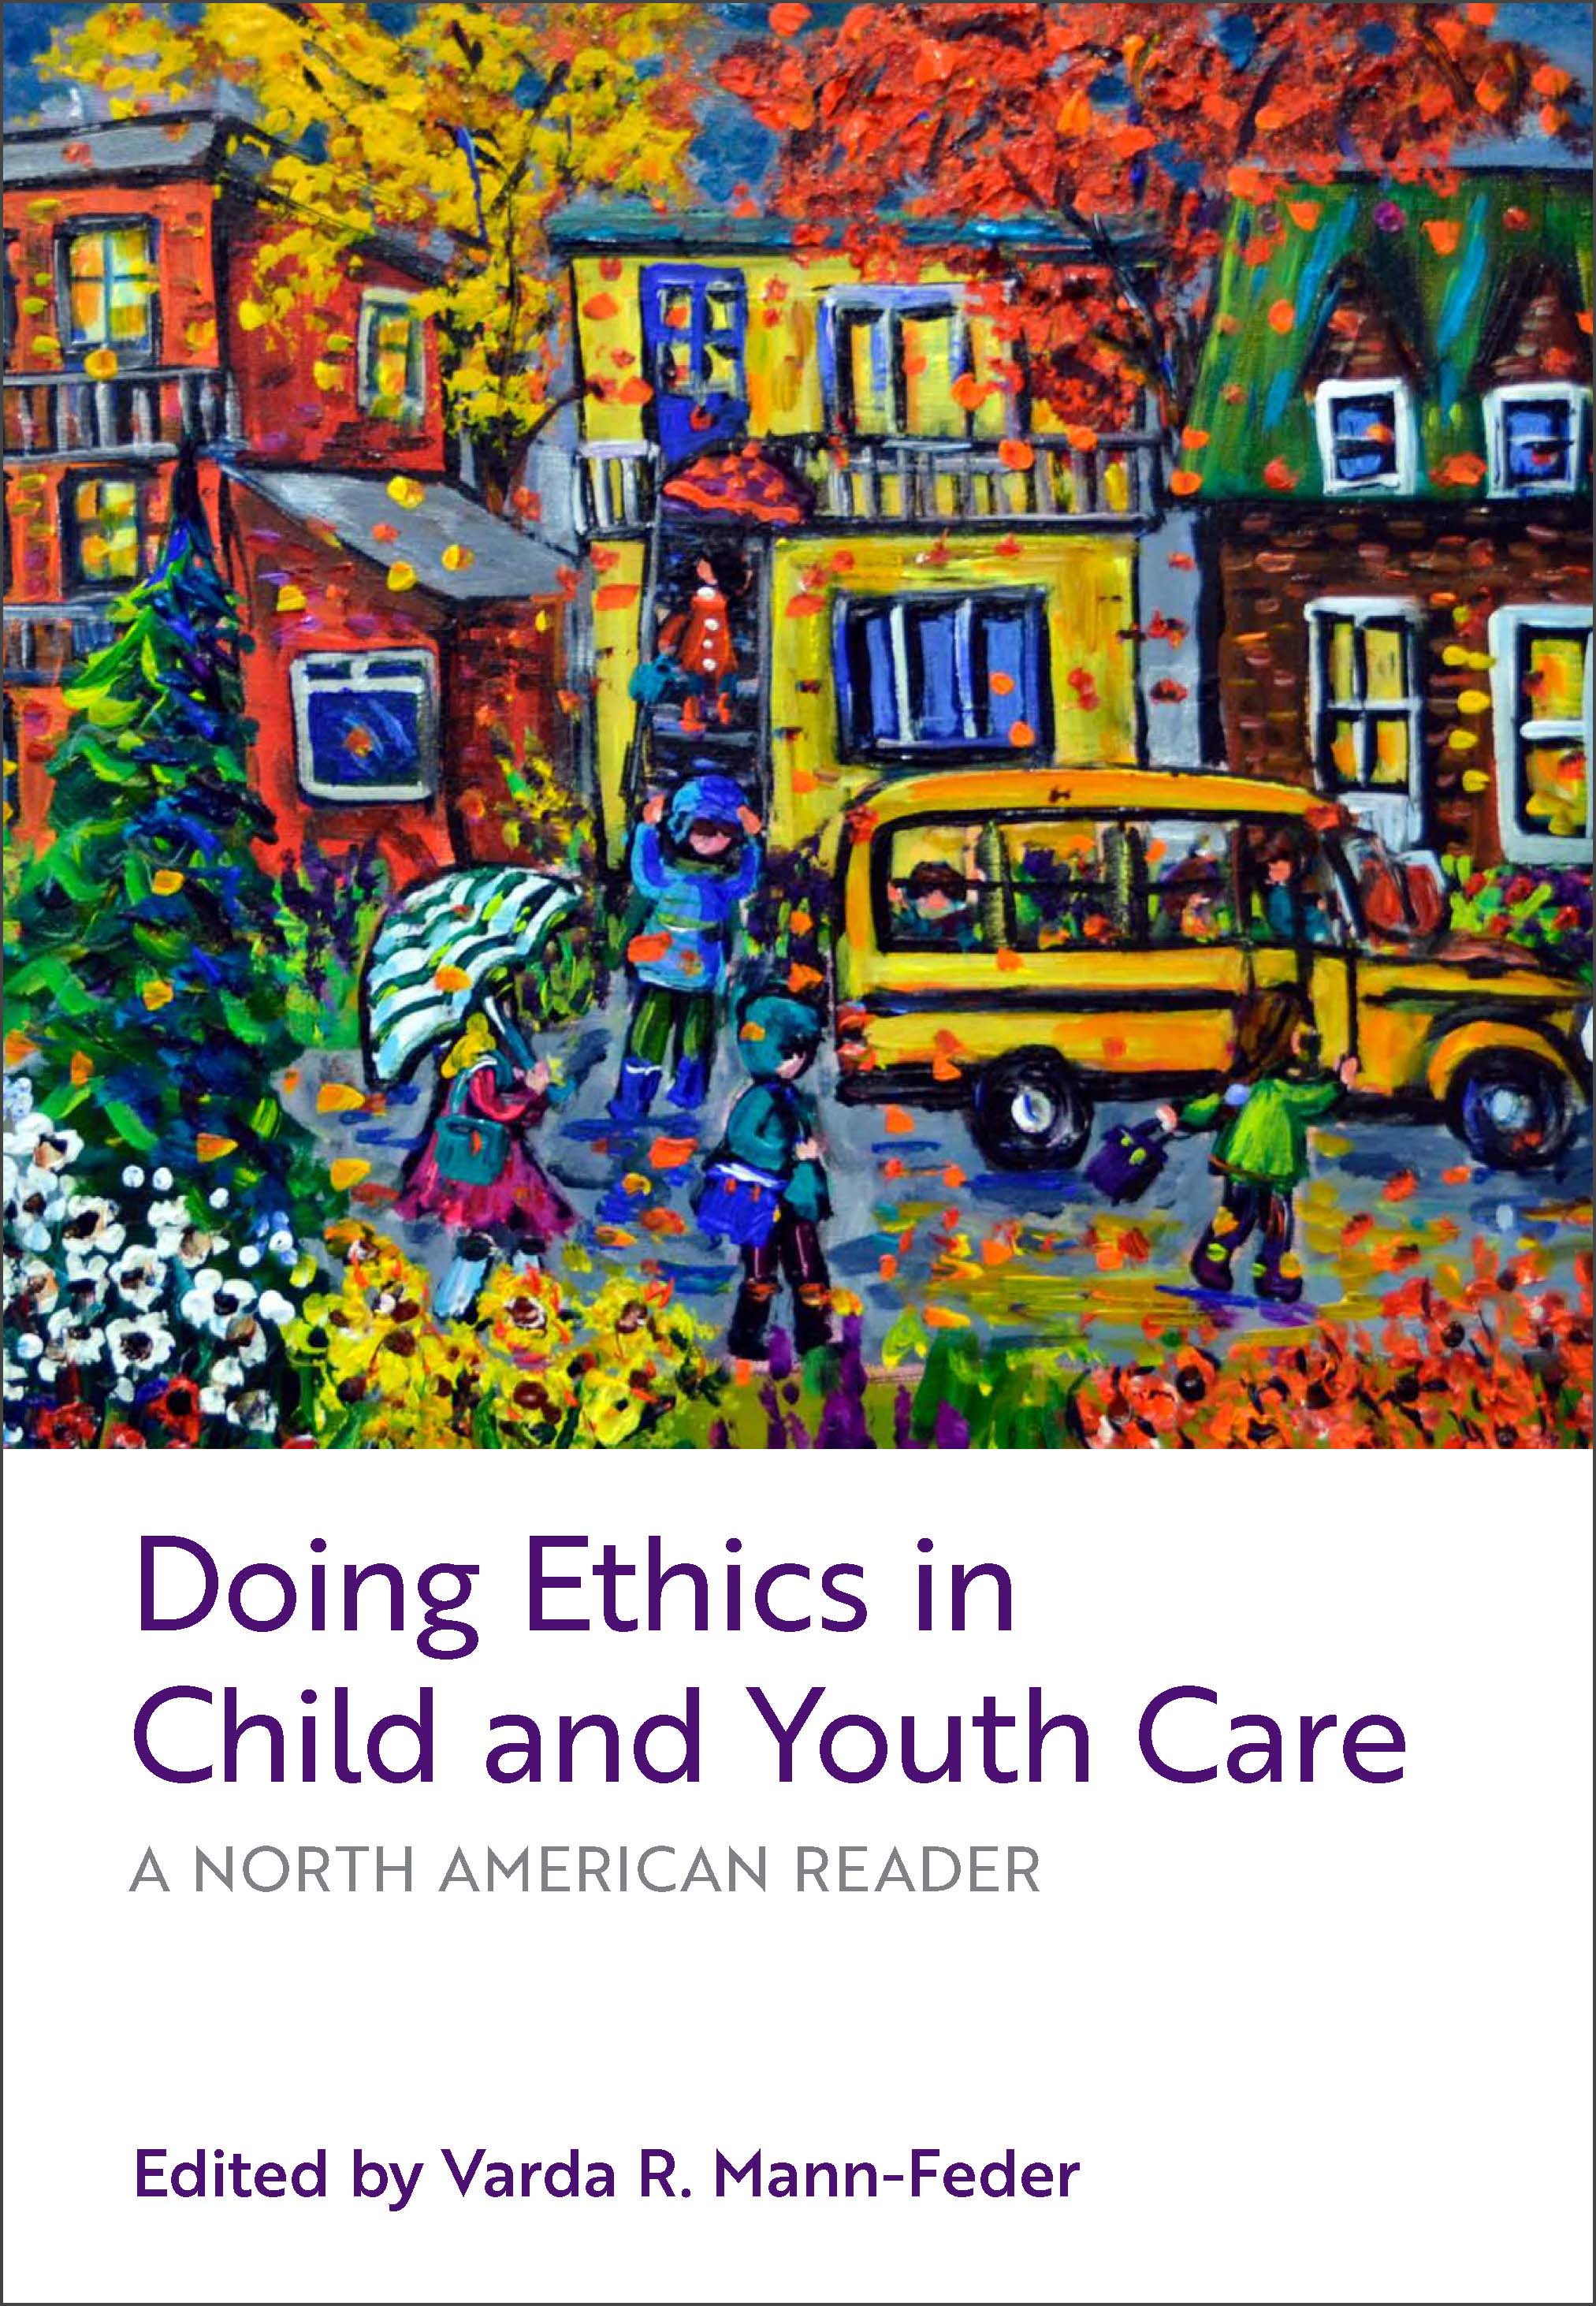 Ethics　Child　in　Canadian　and　Care　Youth　Doing　Scholars